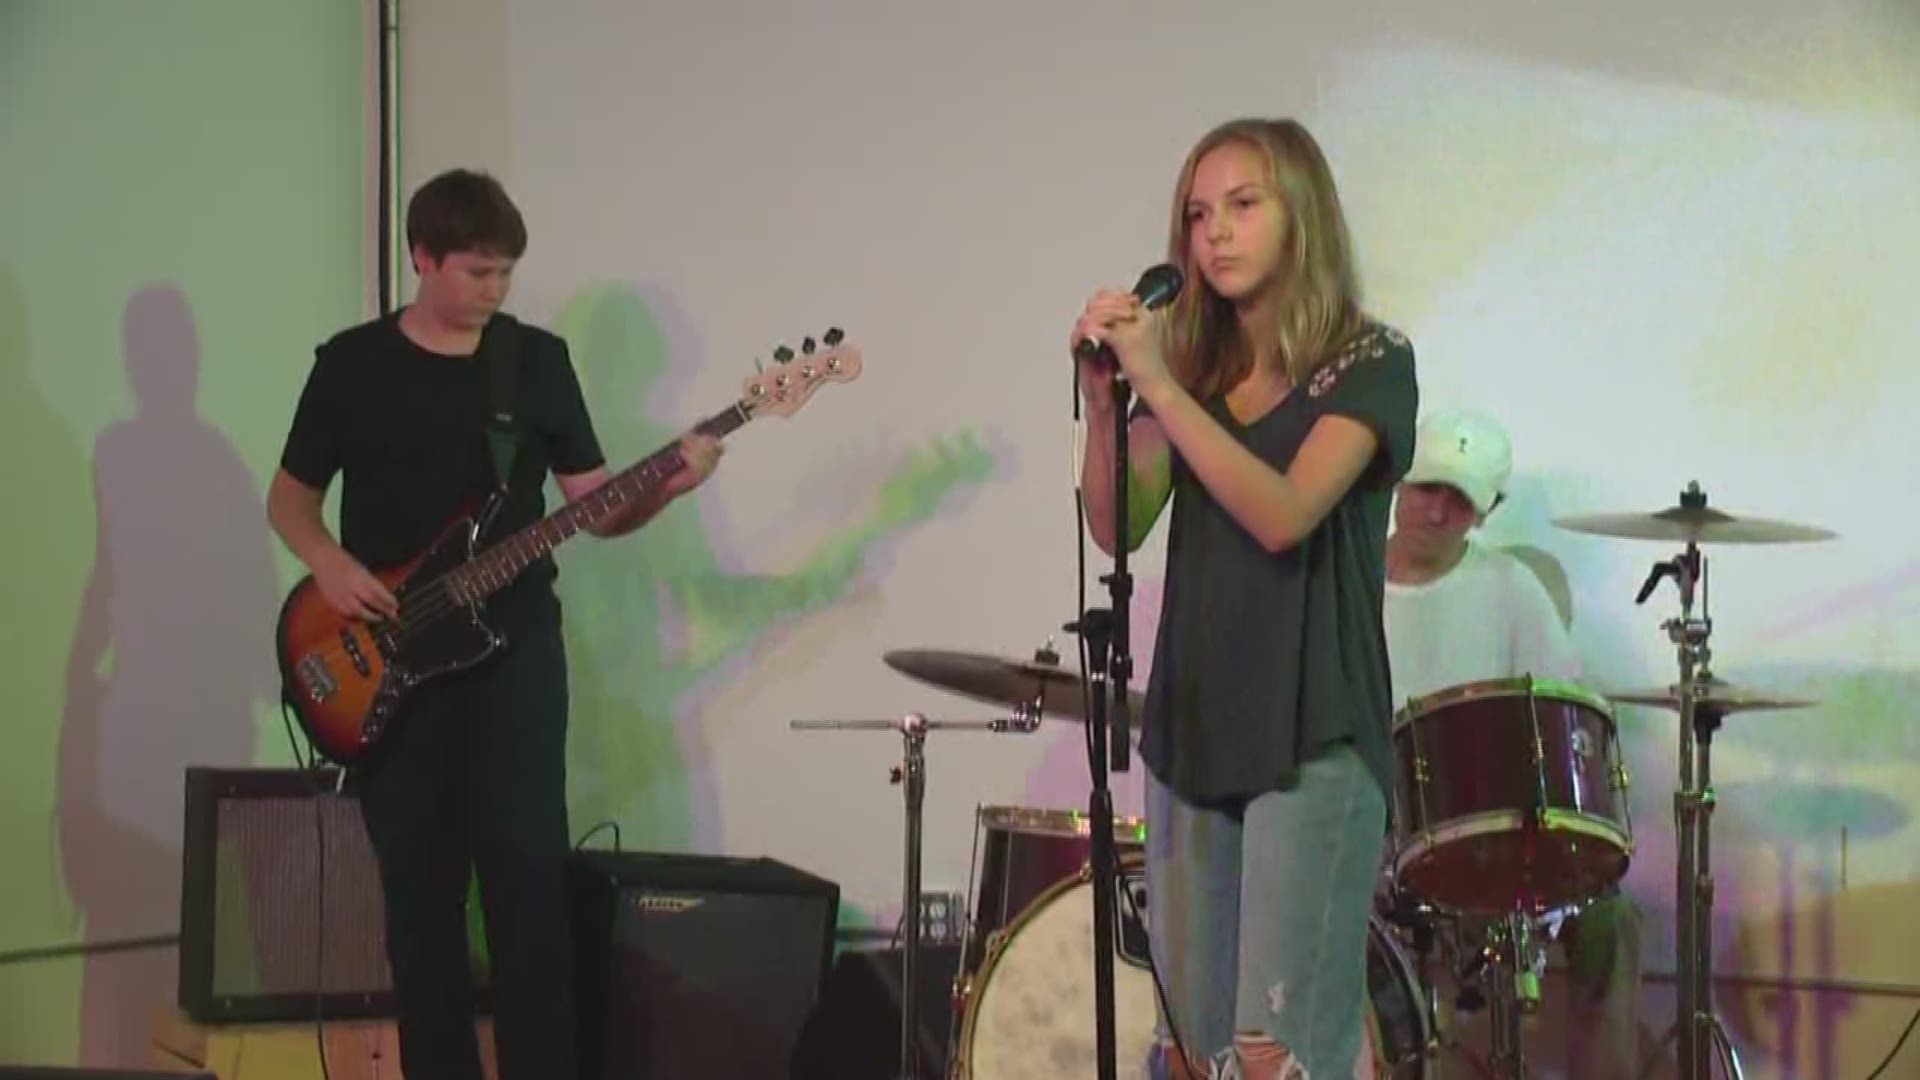 Austin's Band Aid School of Music wrapped up their 'Rock for Relief' concert, featuring students from the school's Rock Band program. All proceeds are going to help musicians recovering from Hurricane Harvey.